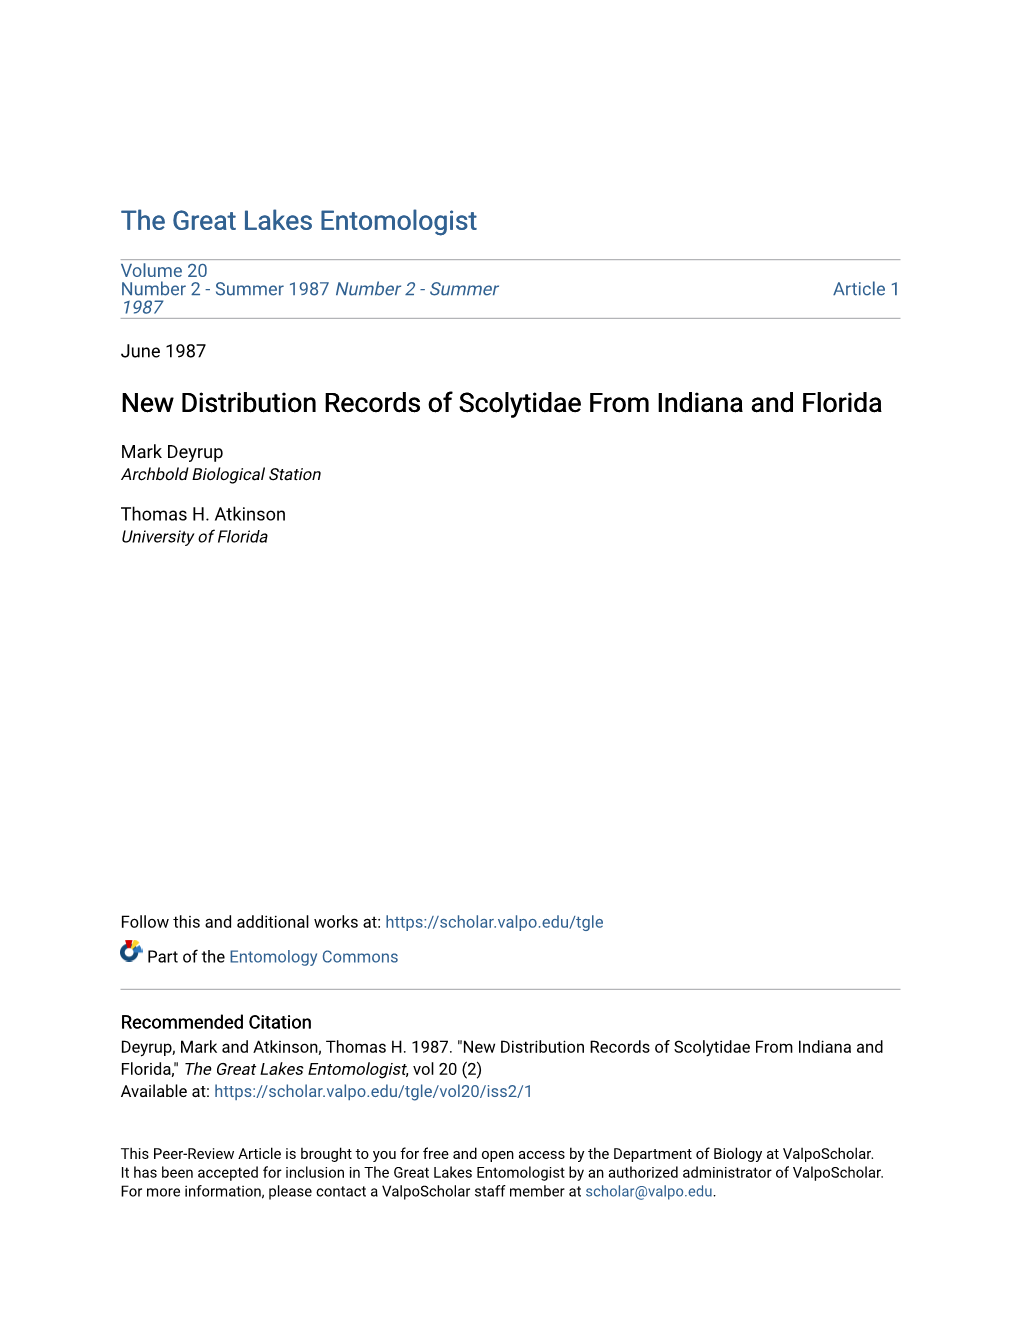 New Distribution Records of Scolytidae from Indiana and Florida